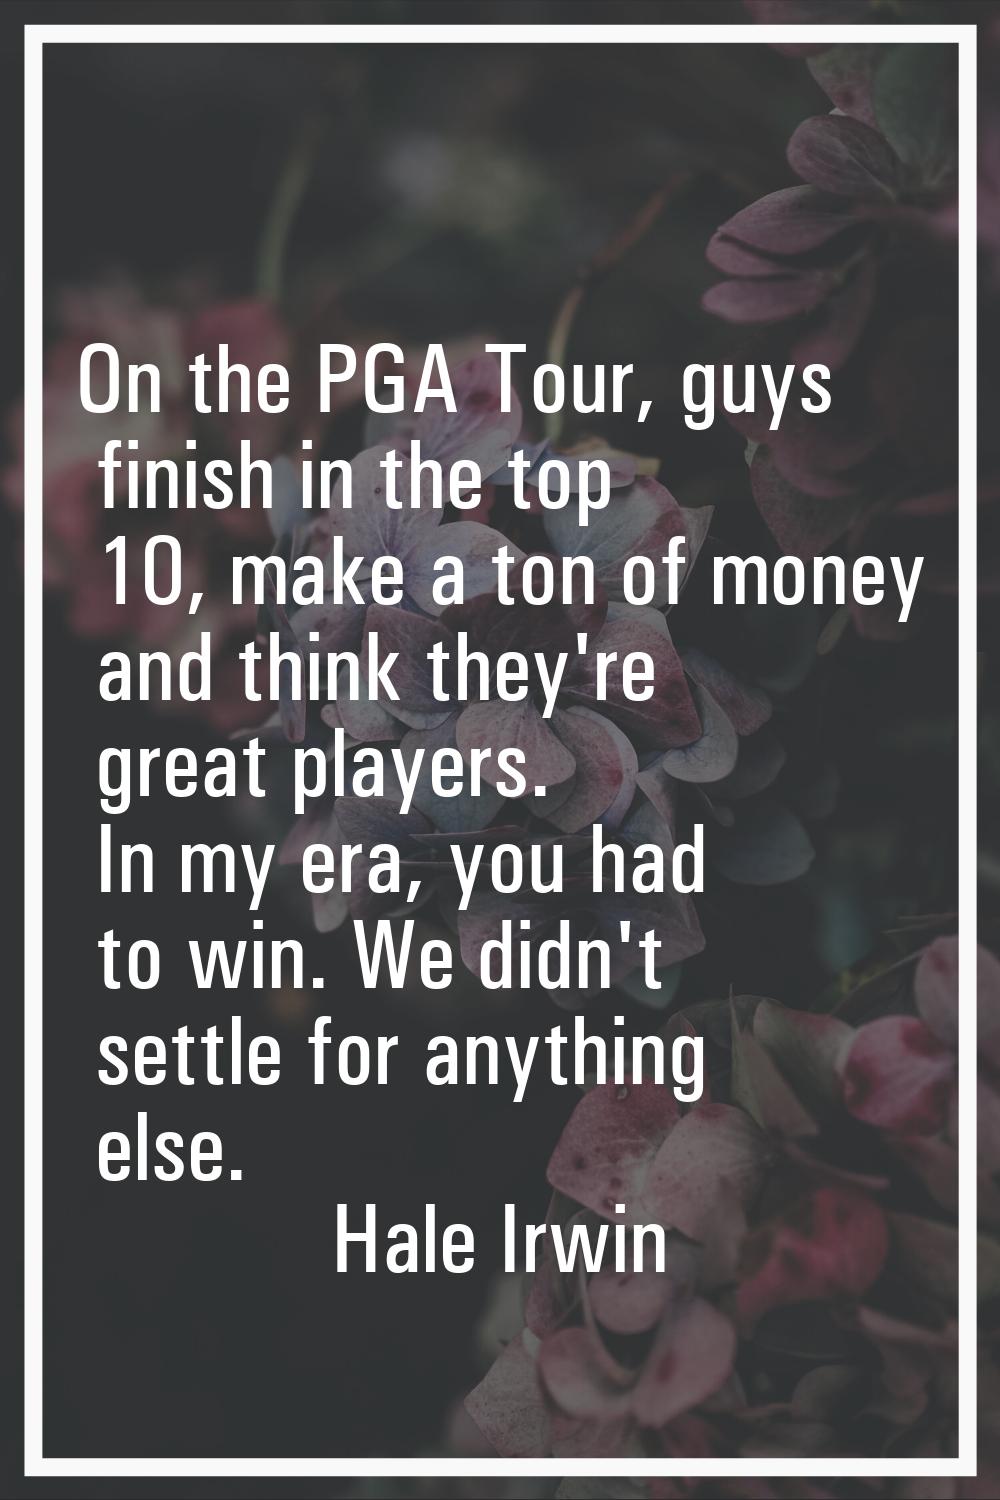 On the PGA Tour, guys finish in the top 10, make a ton of money and think they're great players. In